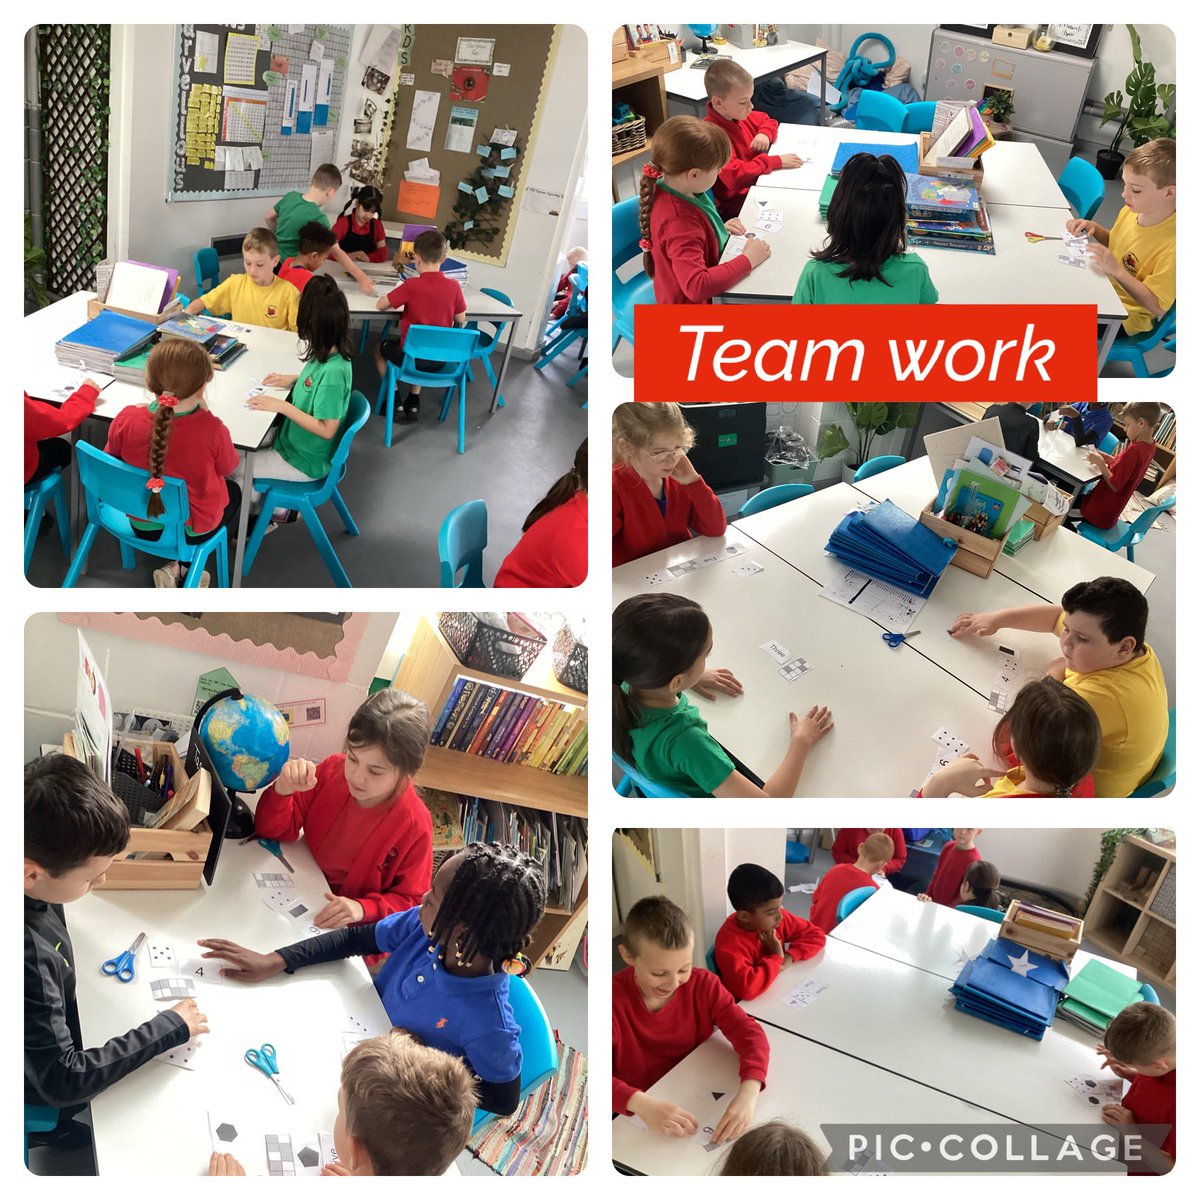 #Year3 are understanding the importance of team work in this maths game today. We can’t speak or use gestures, but we must help each other collect all the cards with the same value while always keeping at least two in front of us. #nrichmaths